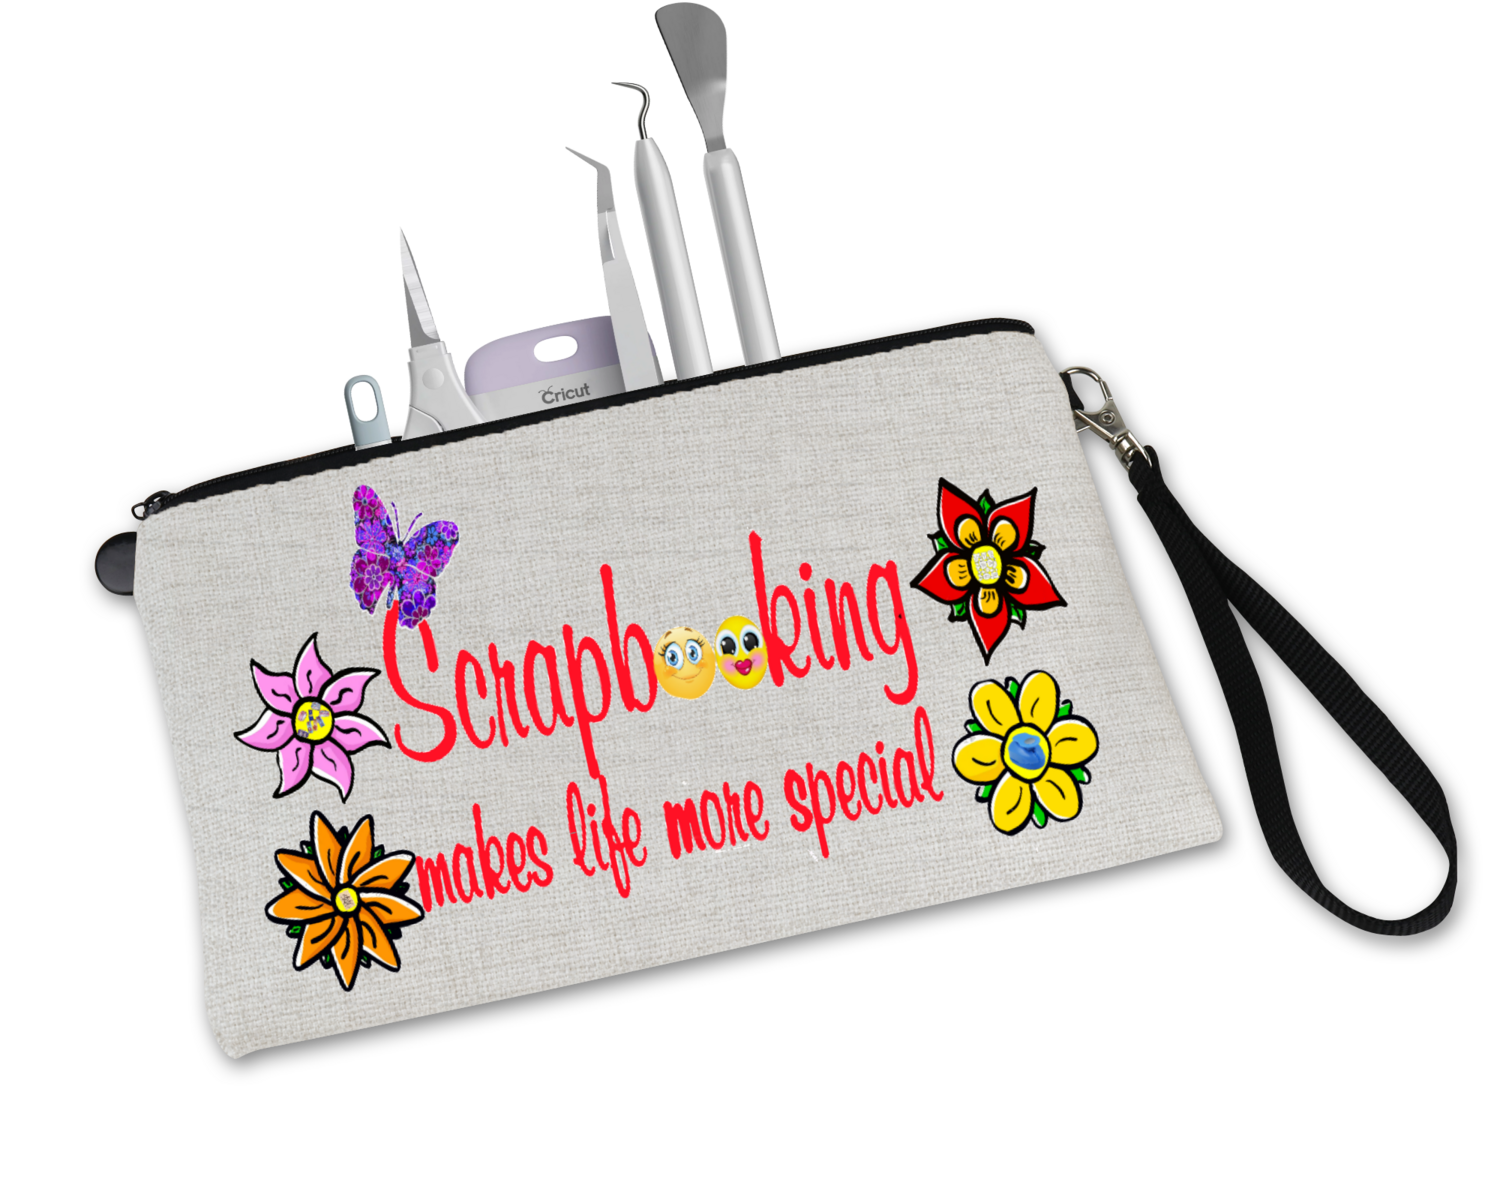 Crafting Tool Bag: SCRAPBOOKING MAKES LIFE MORE SPECIAL